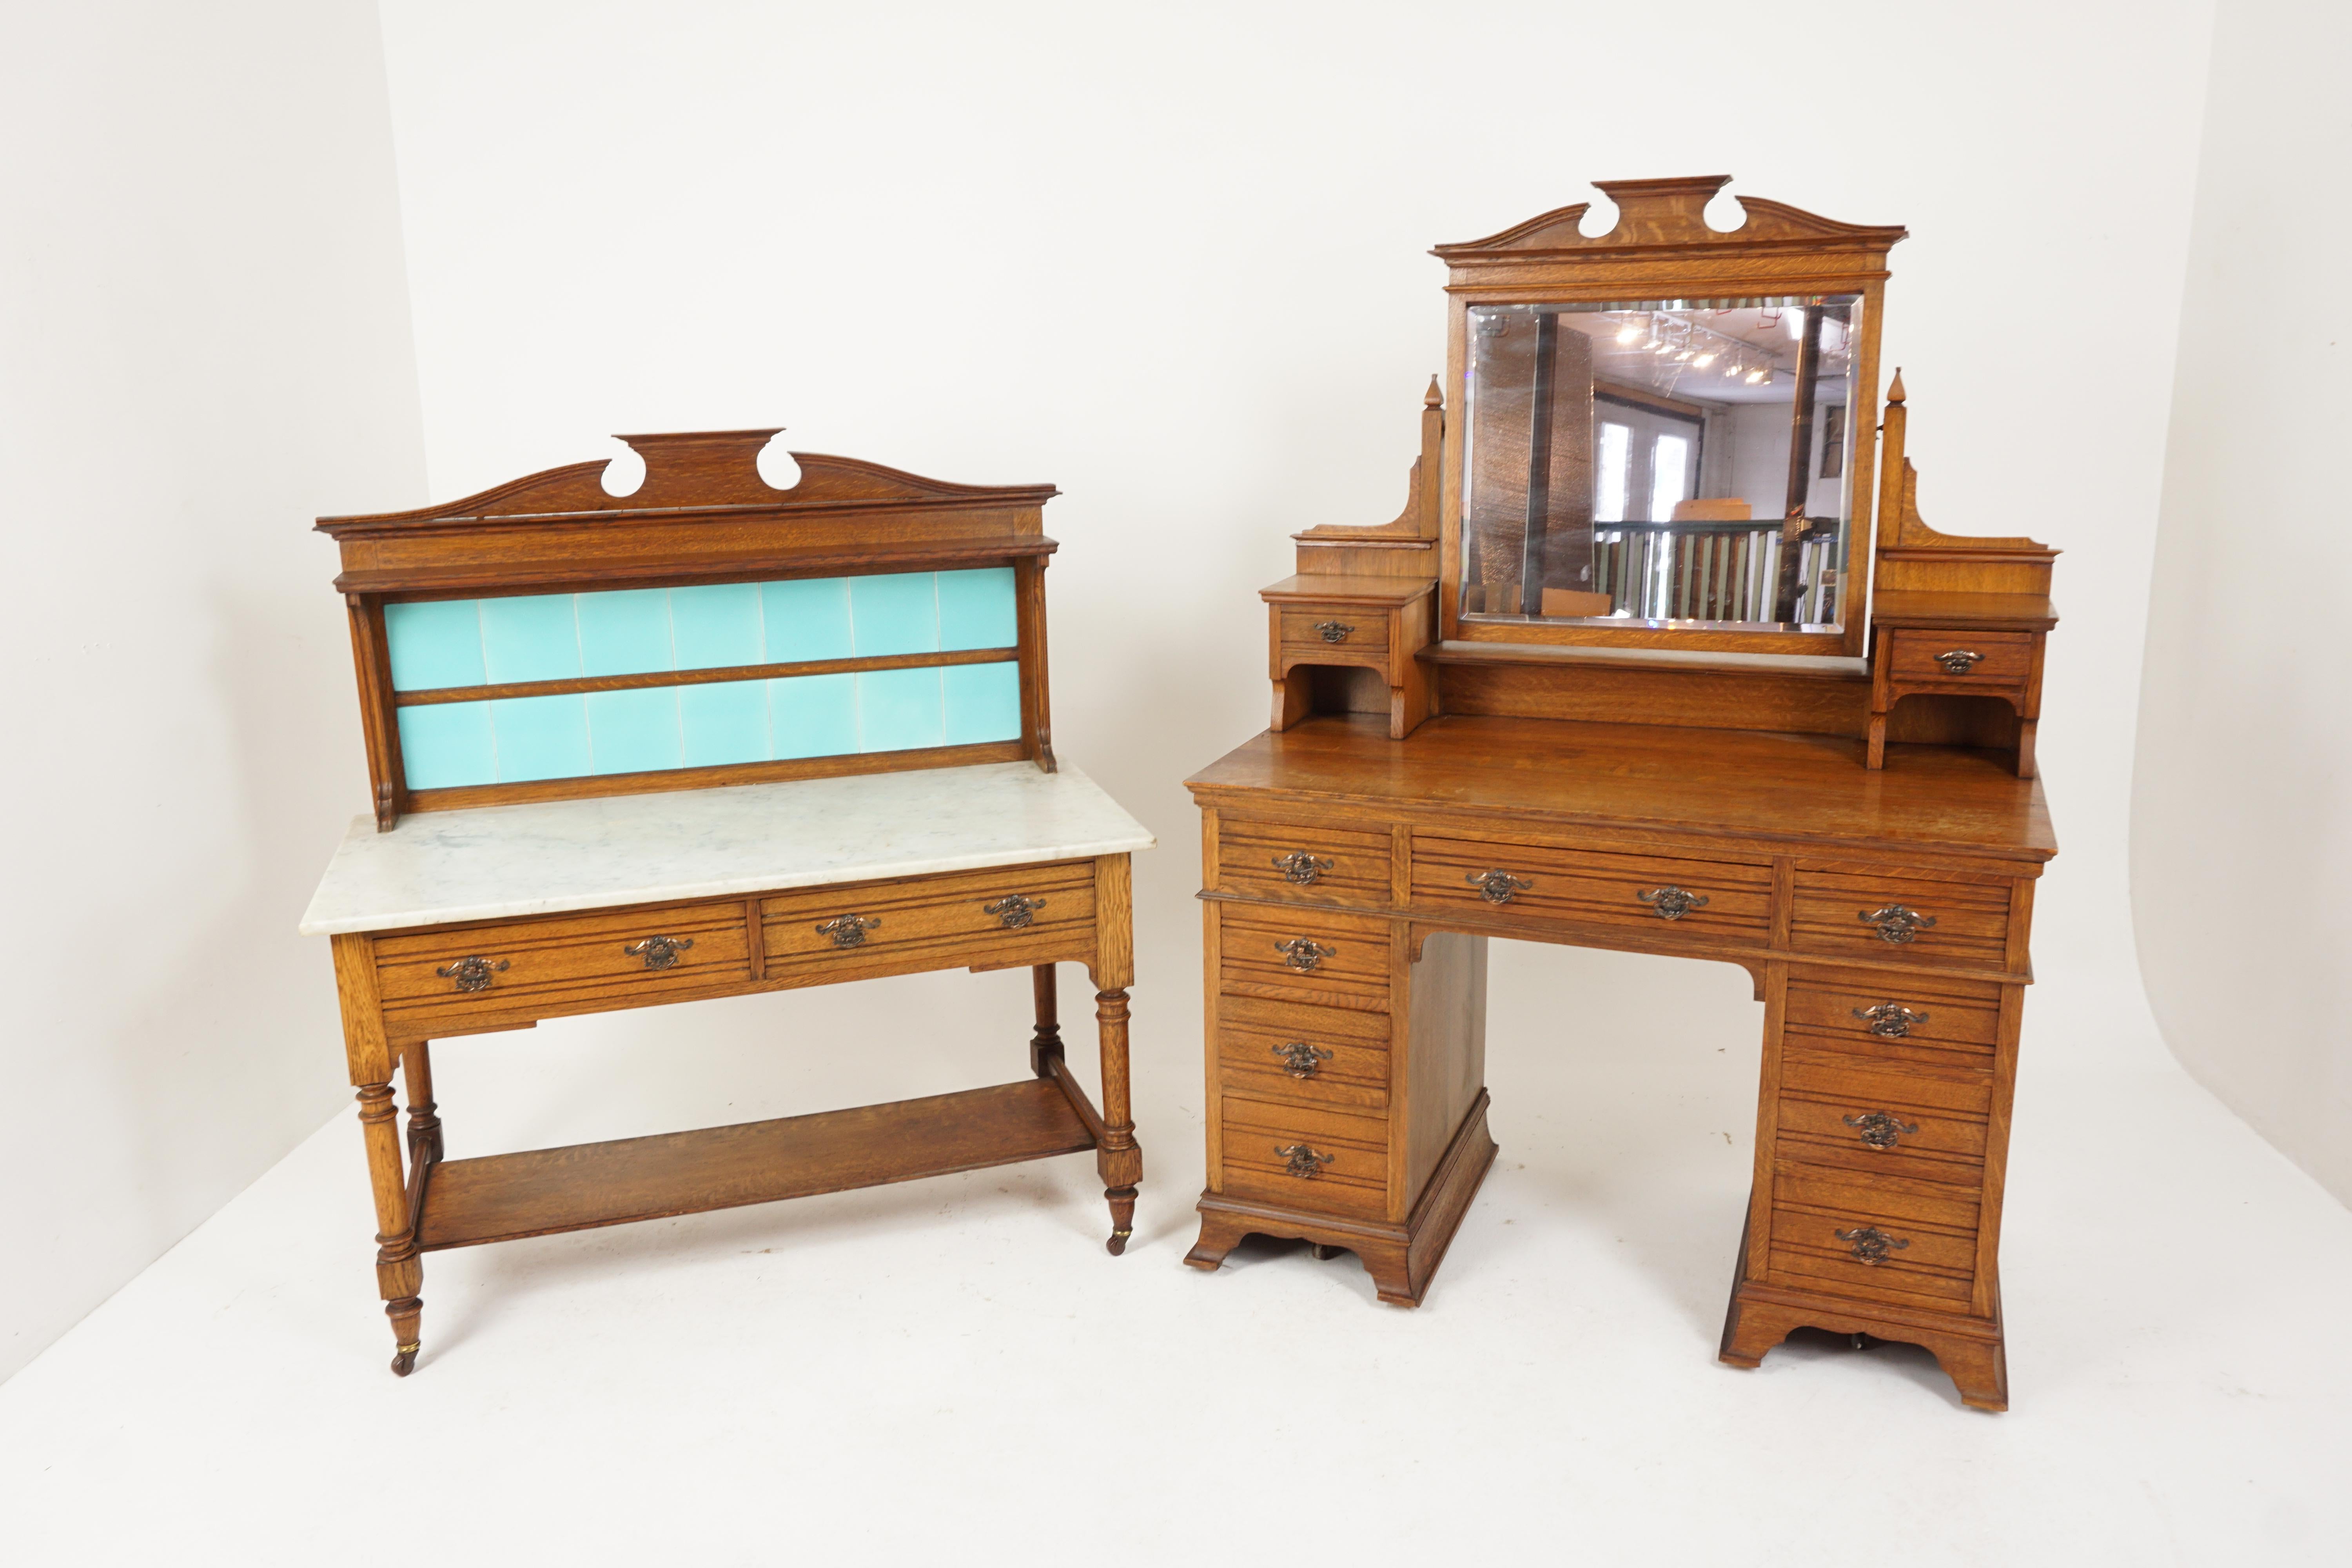 Aesthetic Movement Tiger Oak Vanity, Dresser, Maple & Co. London, England 1900, H538

England 1900
Solid Oak
Original finish
Shaped pediment on top
Beveled mirror below
Flanked by a pair of dovetailed drawers
Base with rectangular top
Three drawers